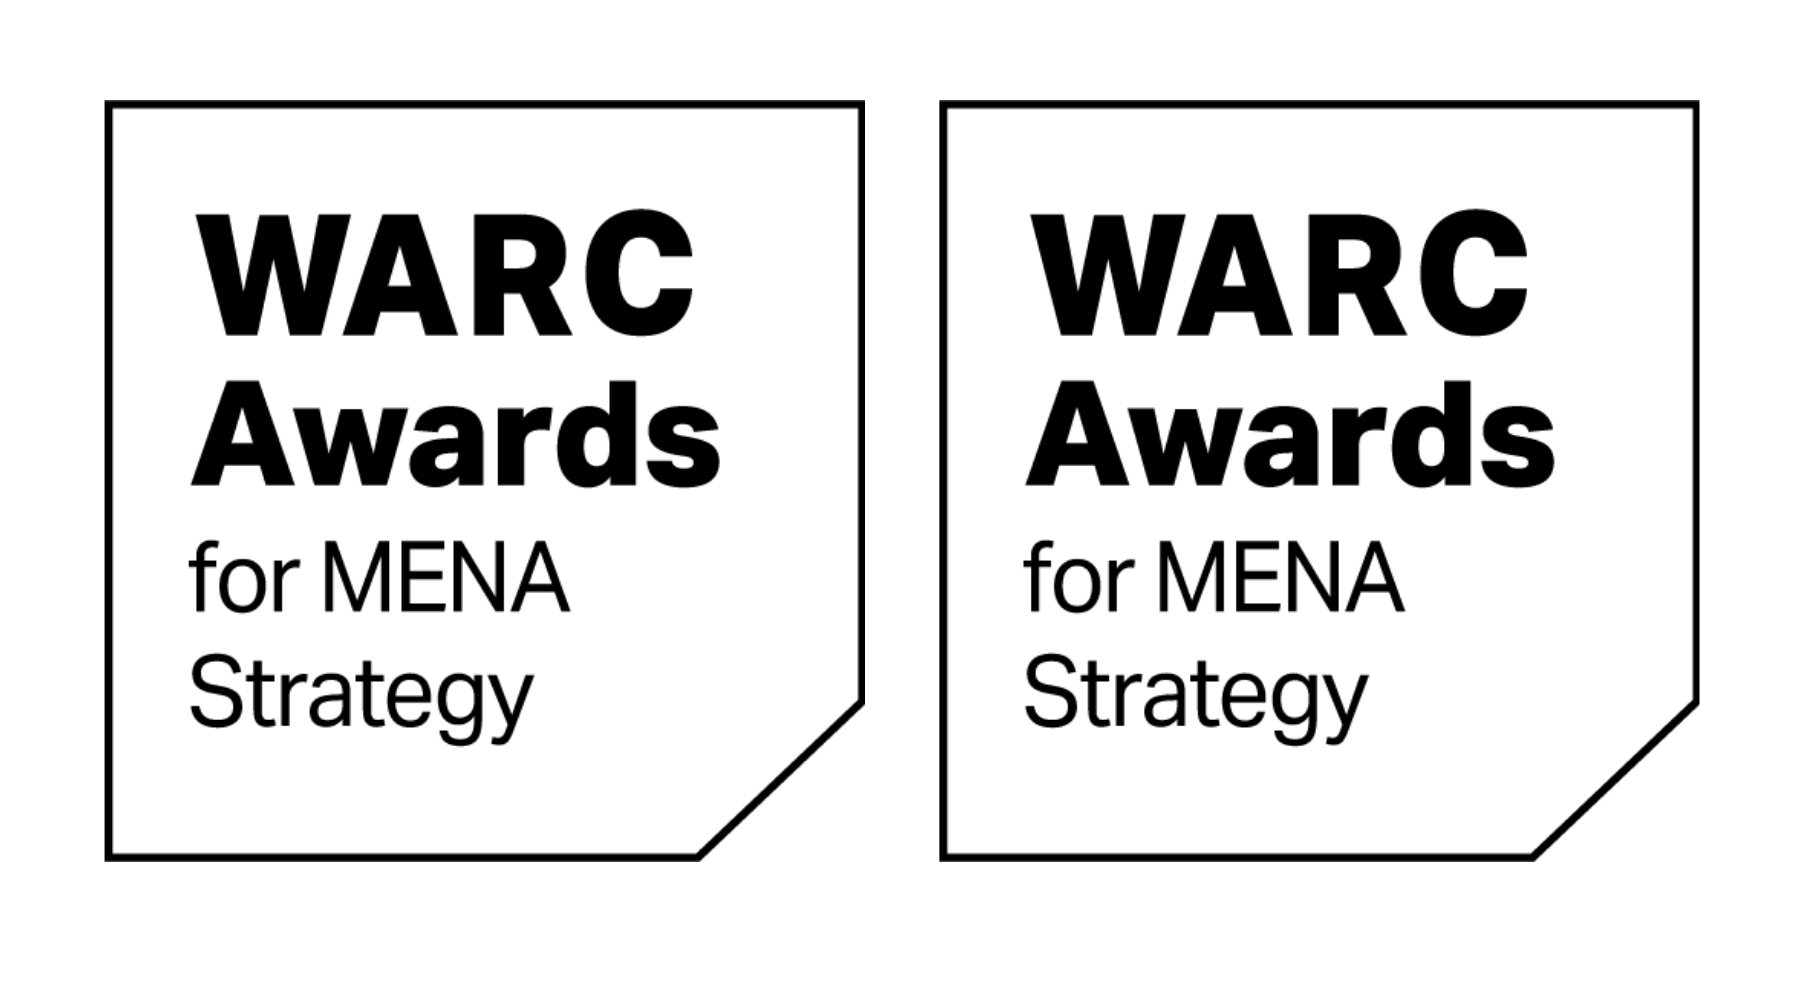 WARC Launches Awards for MENA Strategy 2022